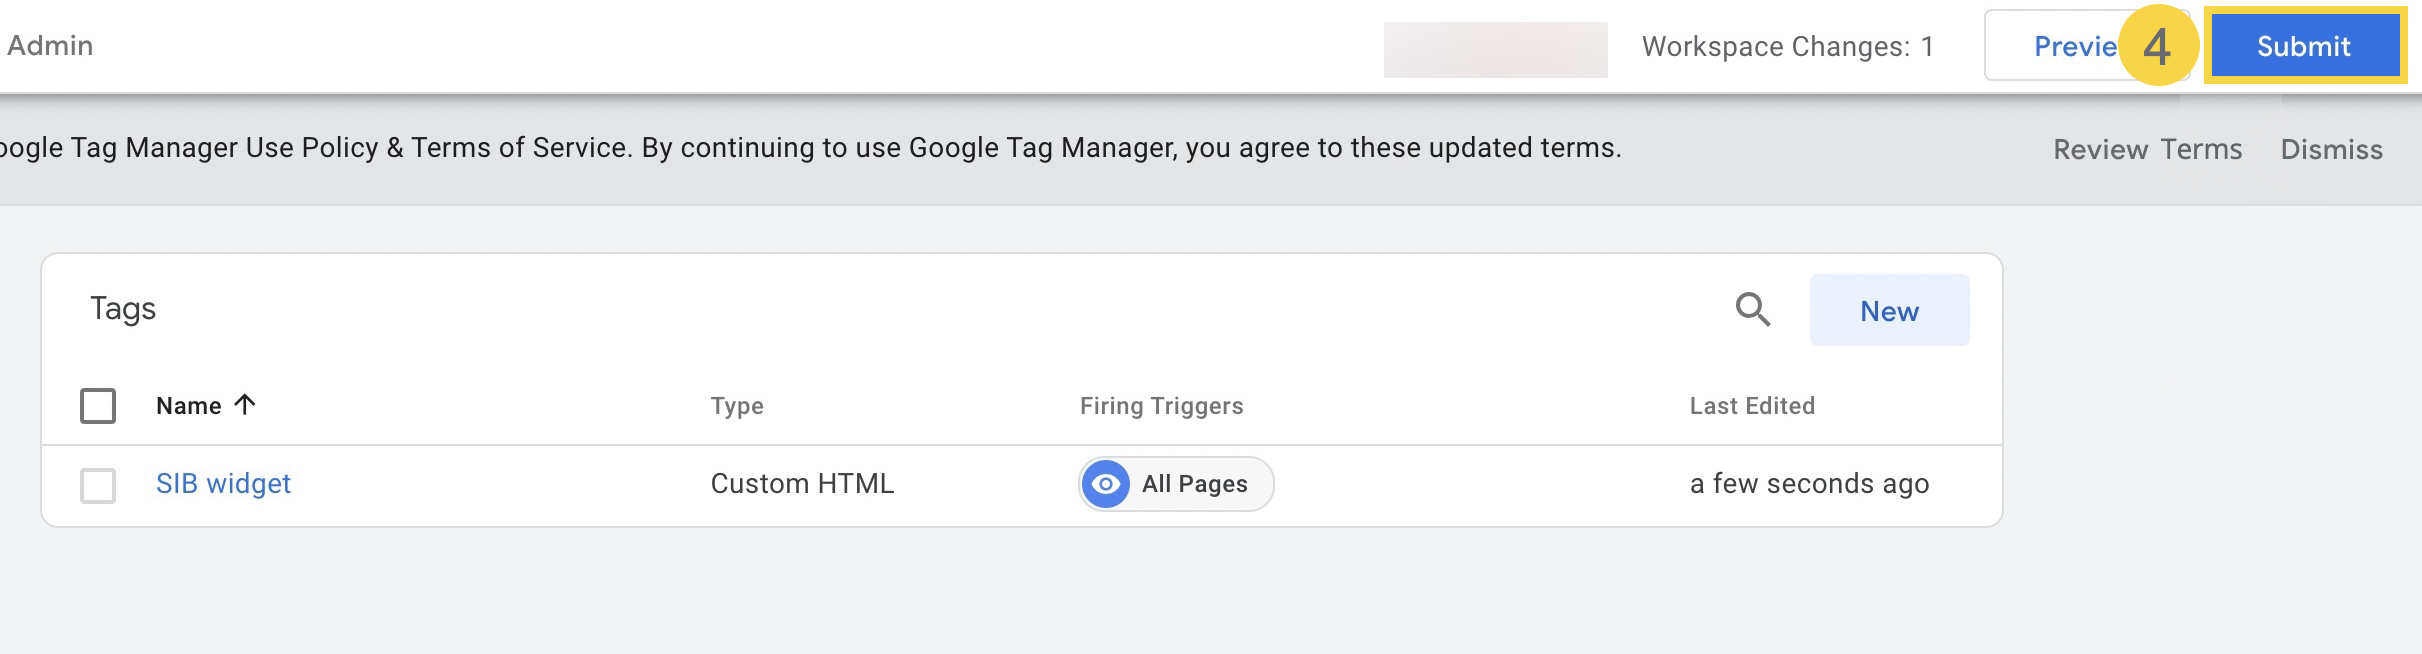 conversations_google-tag-manager-submit_EN-US.png